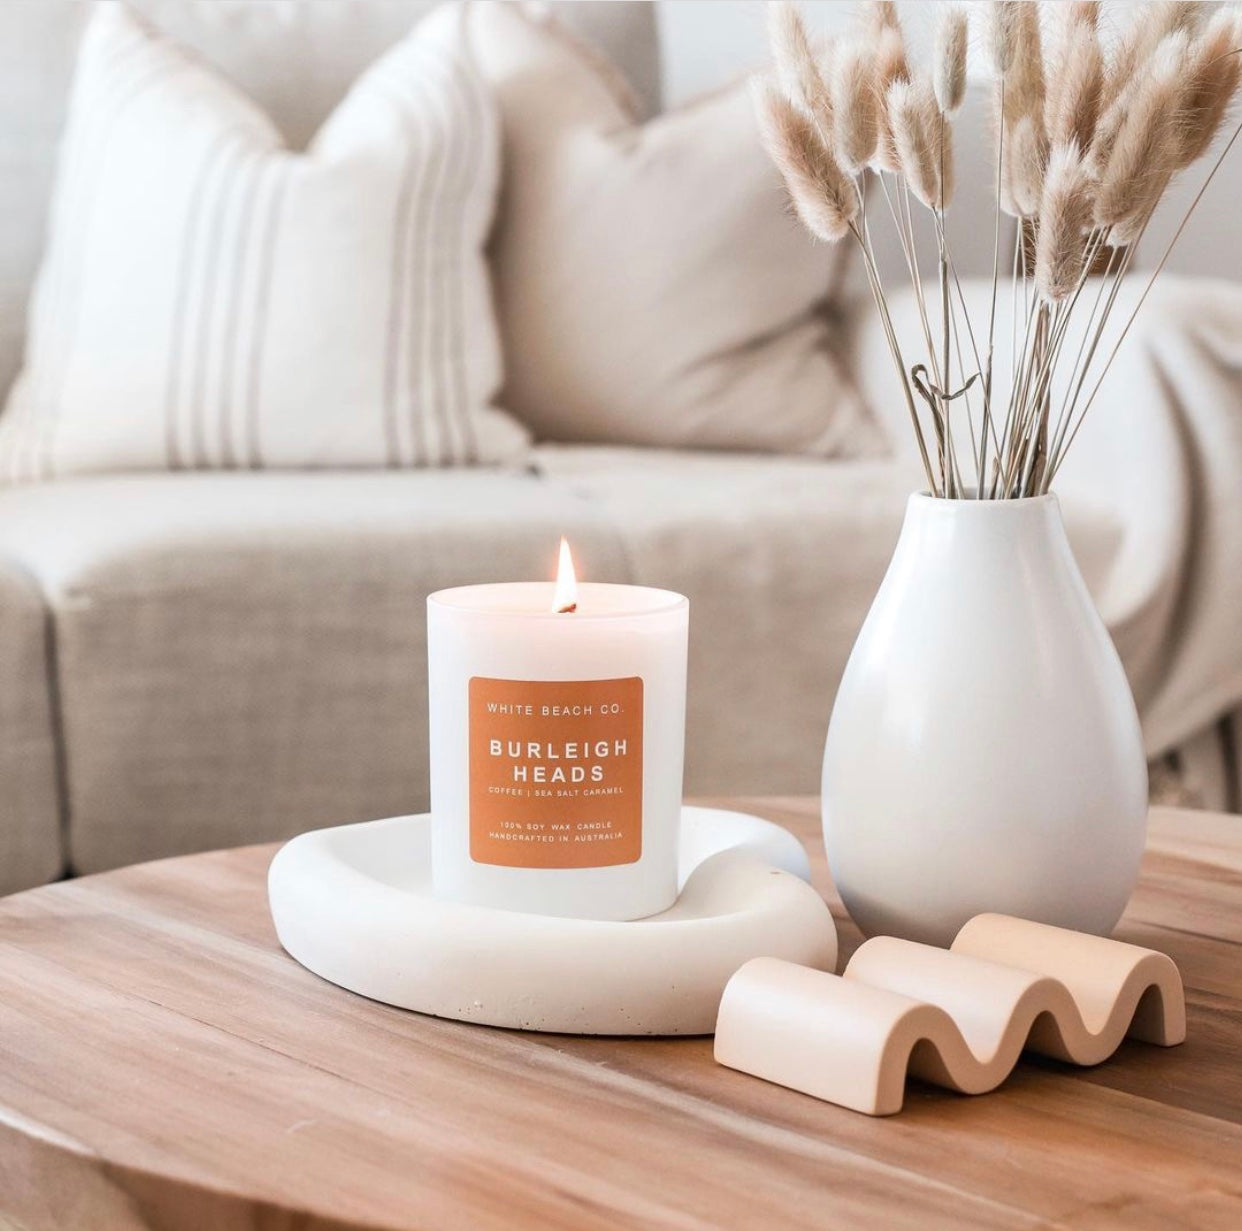 Our Burleigh Heads candle gorgeously styled in Through the lens of Kirsty home